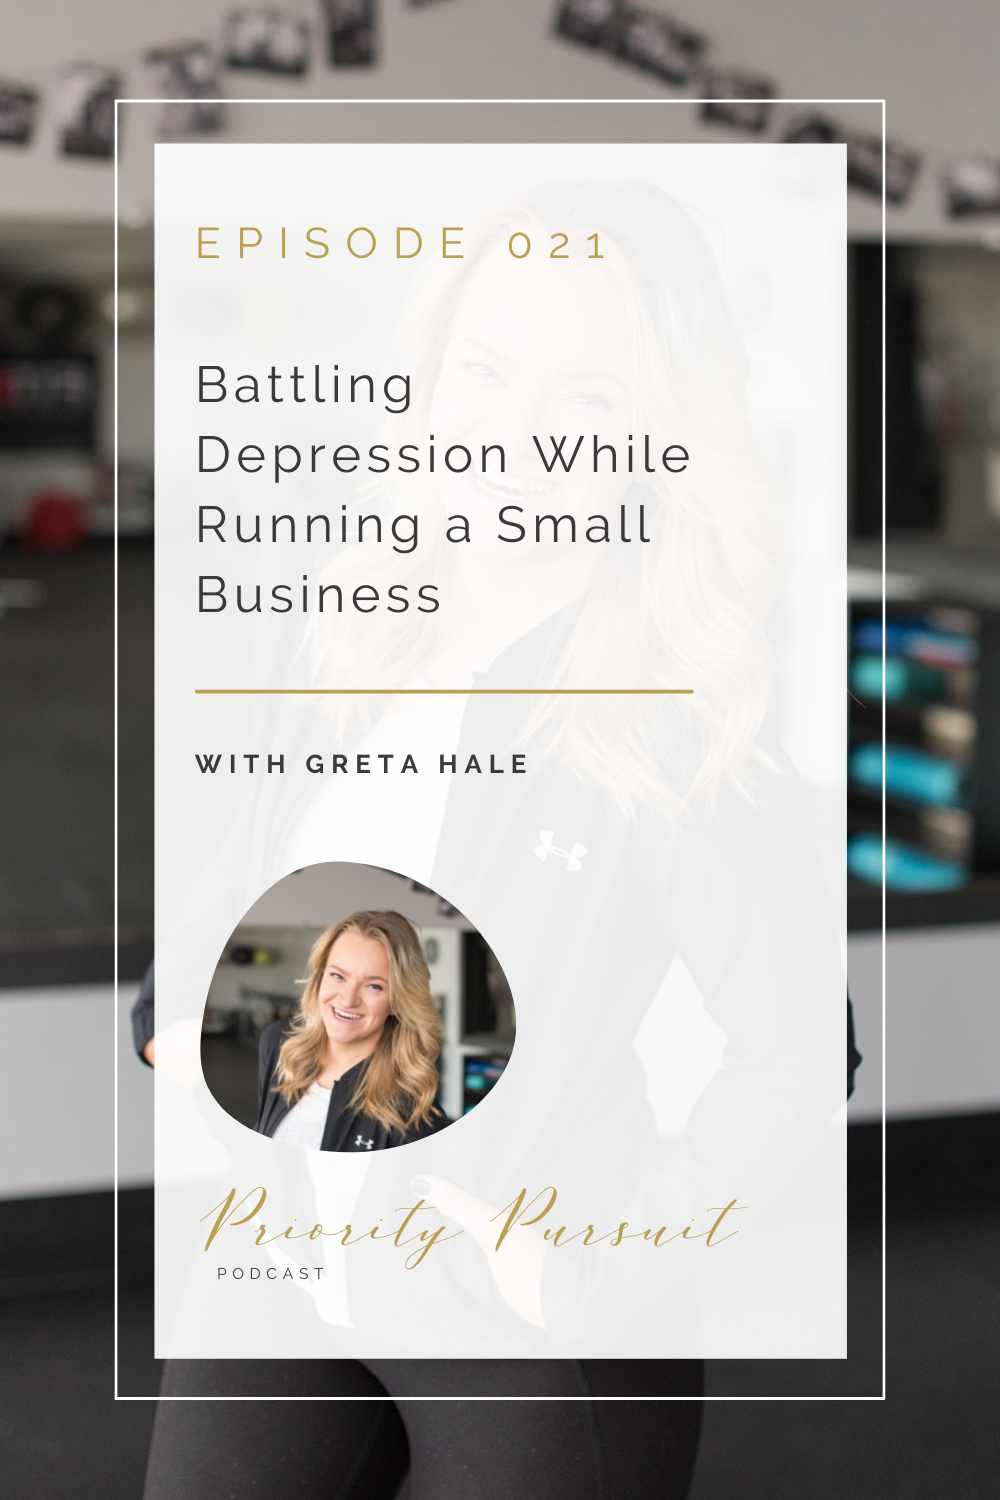 Victoria Rayburn and Greta Hale discuss battling depression while running a small business this episode of “Priority Pursuit.”